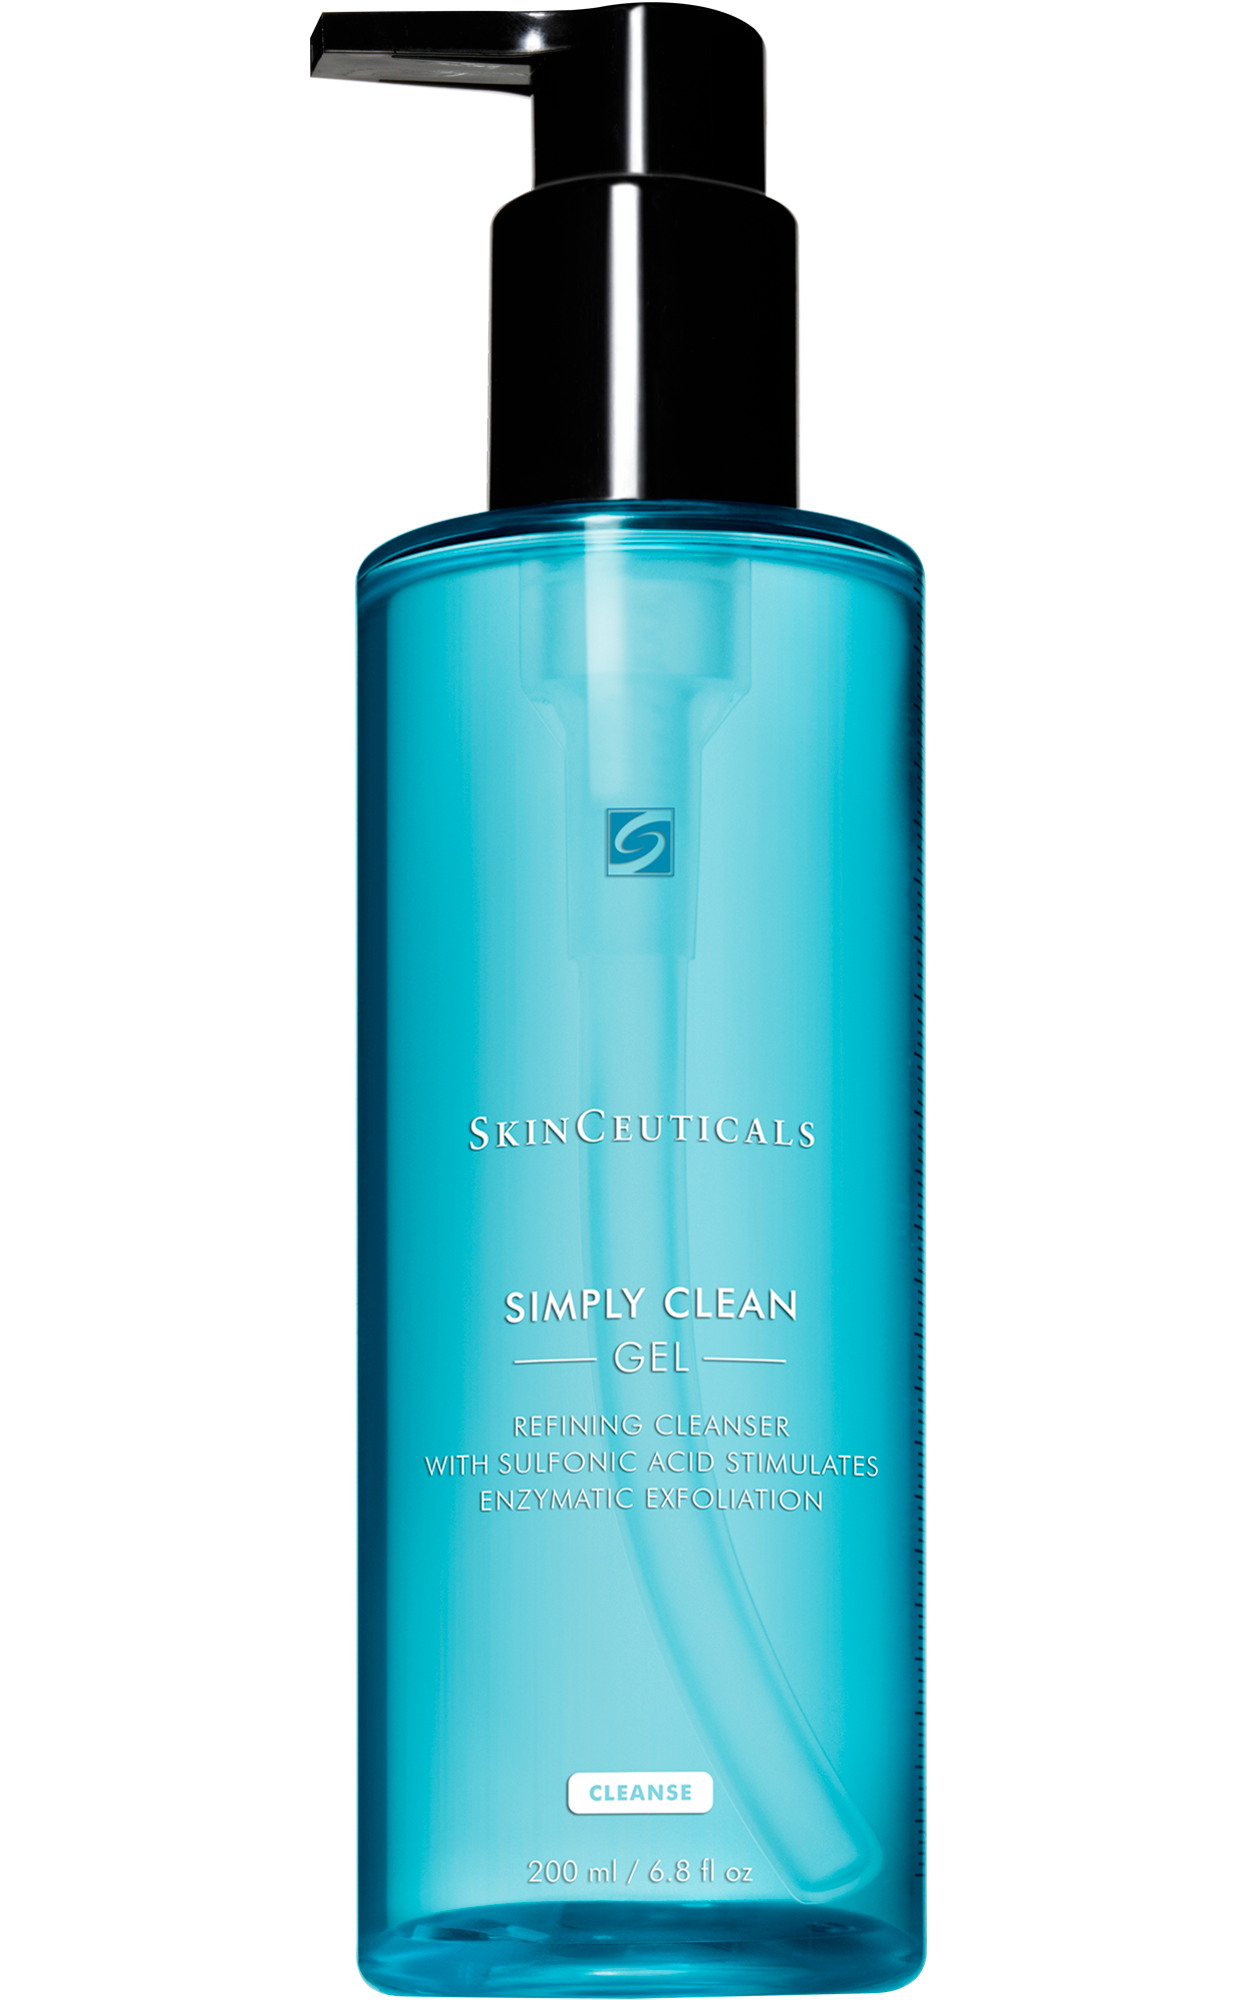 Skinceuticals simply clean